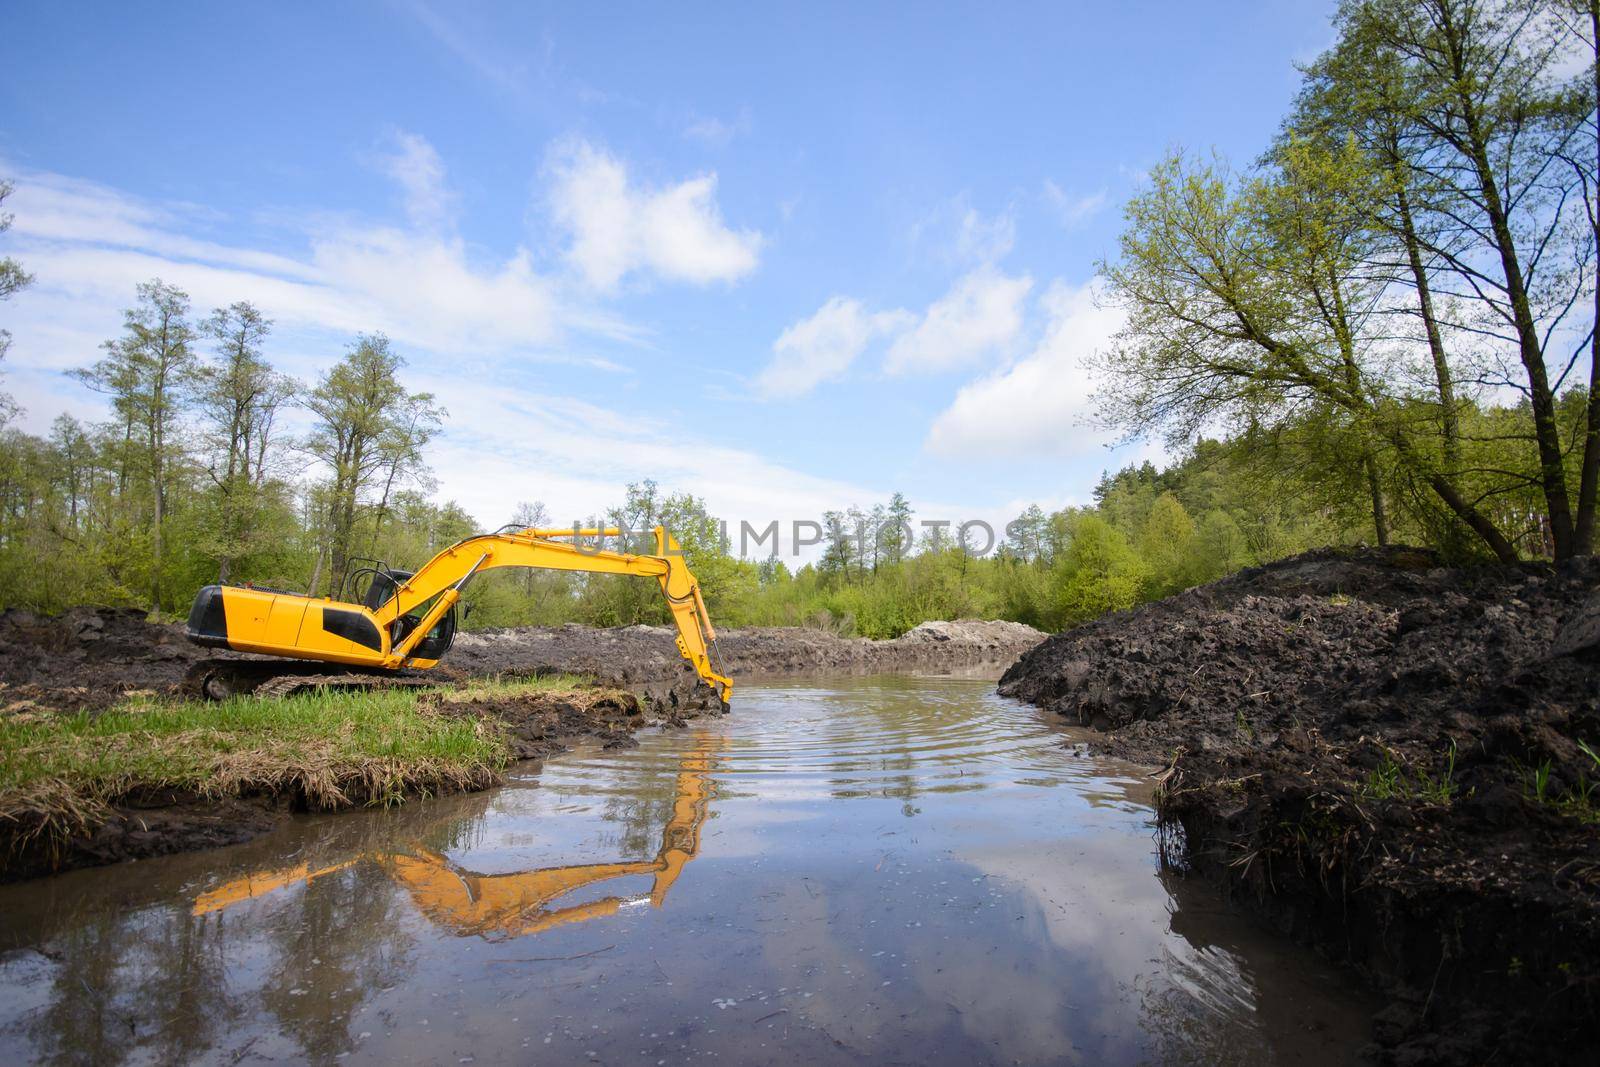 Countryside view of a drainage canal system and working excavator